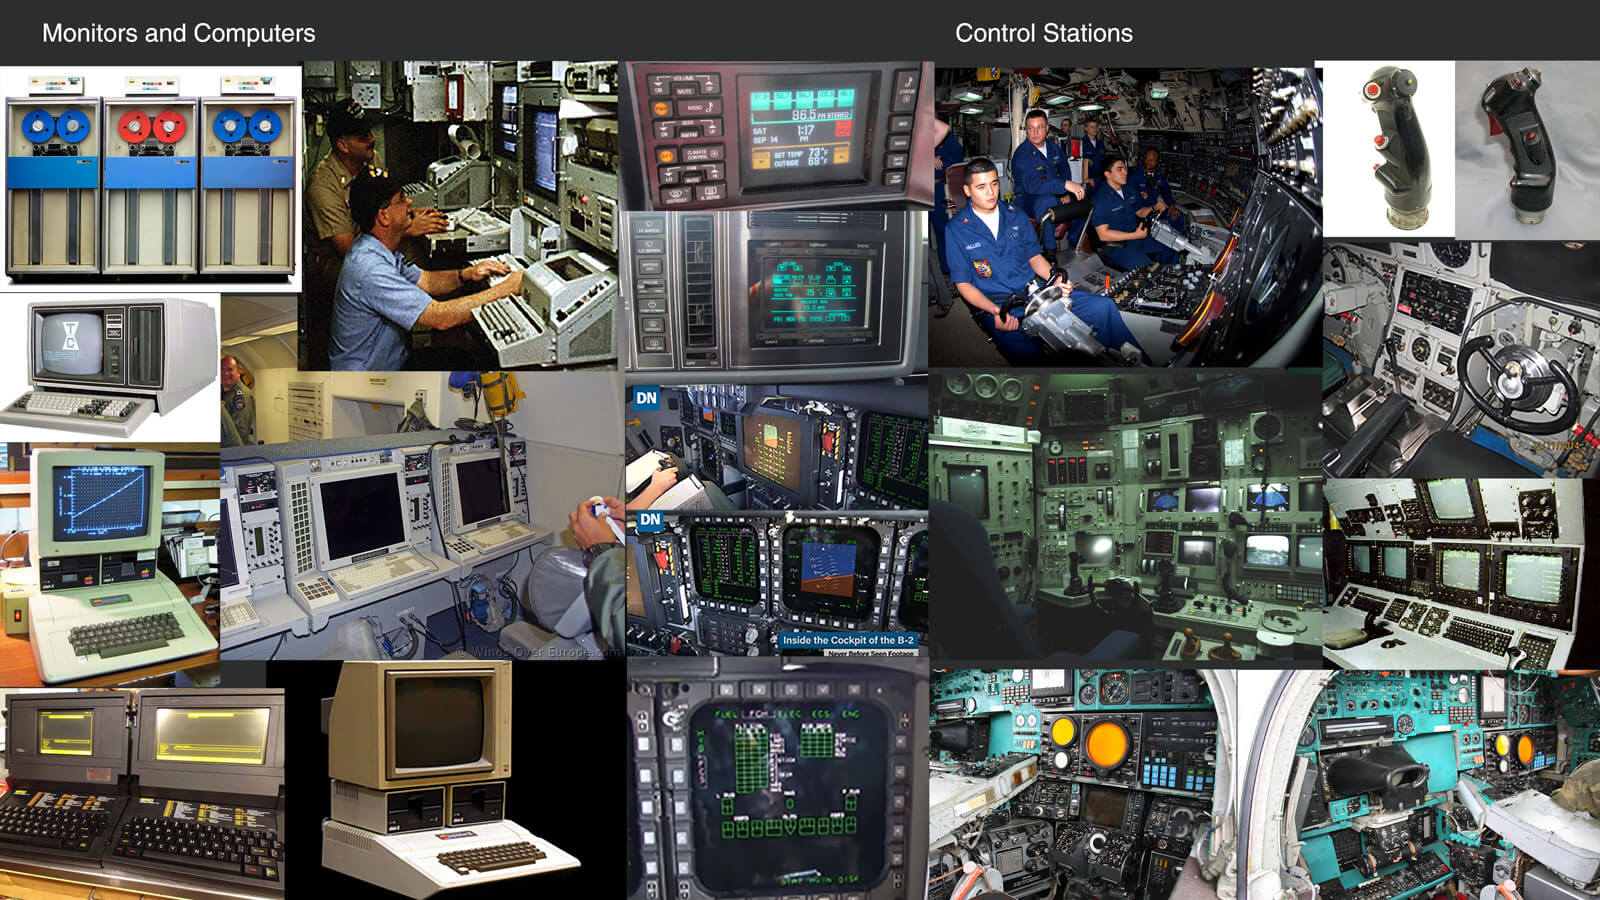 A collage of reference images of HUD screens and other diagnostic devices